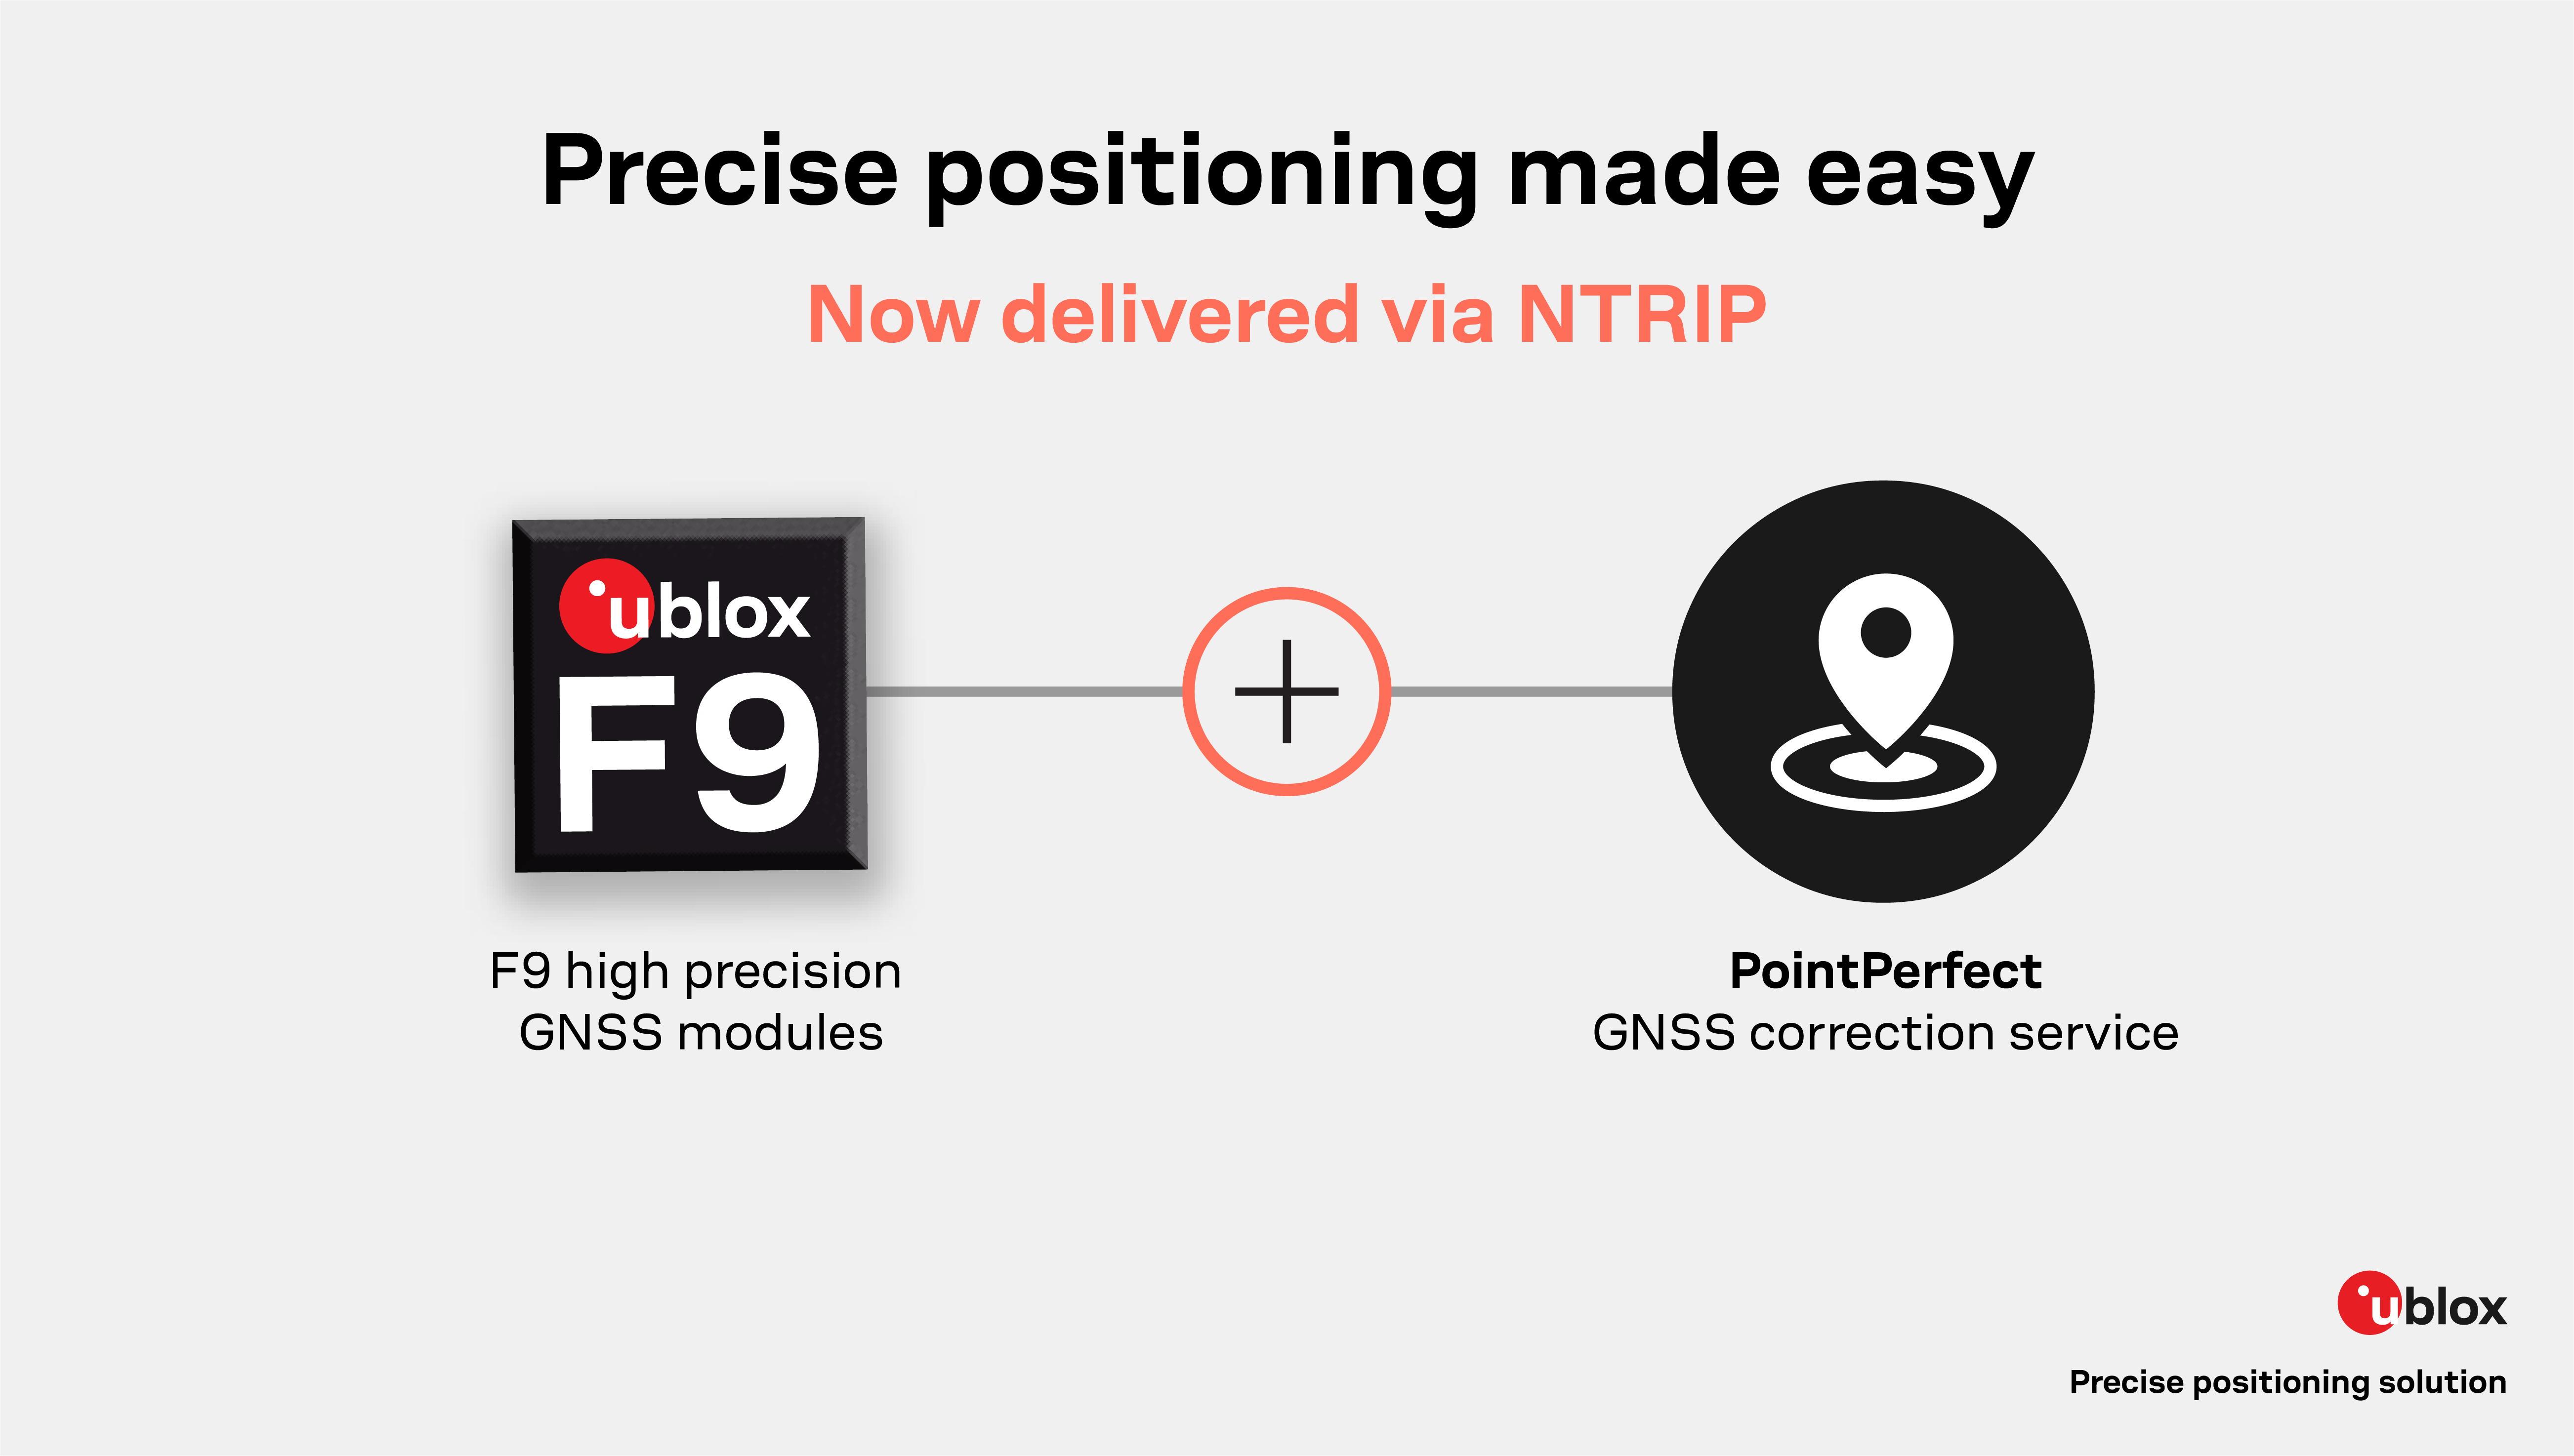 PointPerfect NTRIP service components